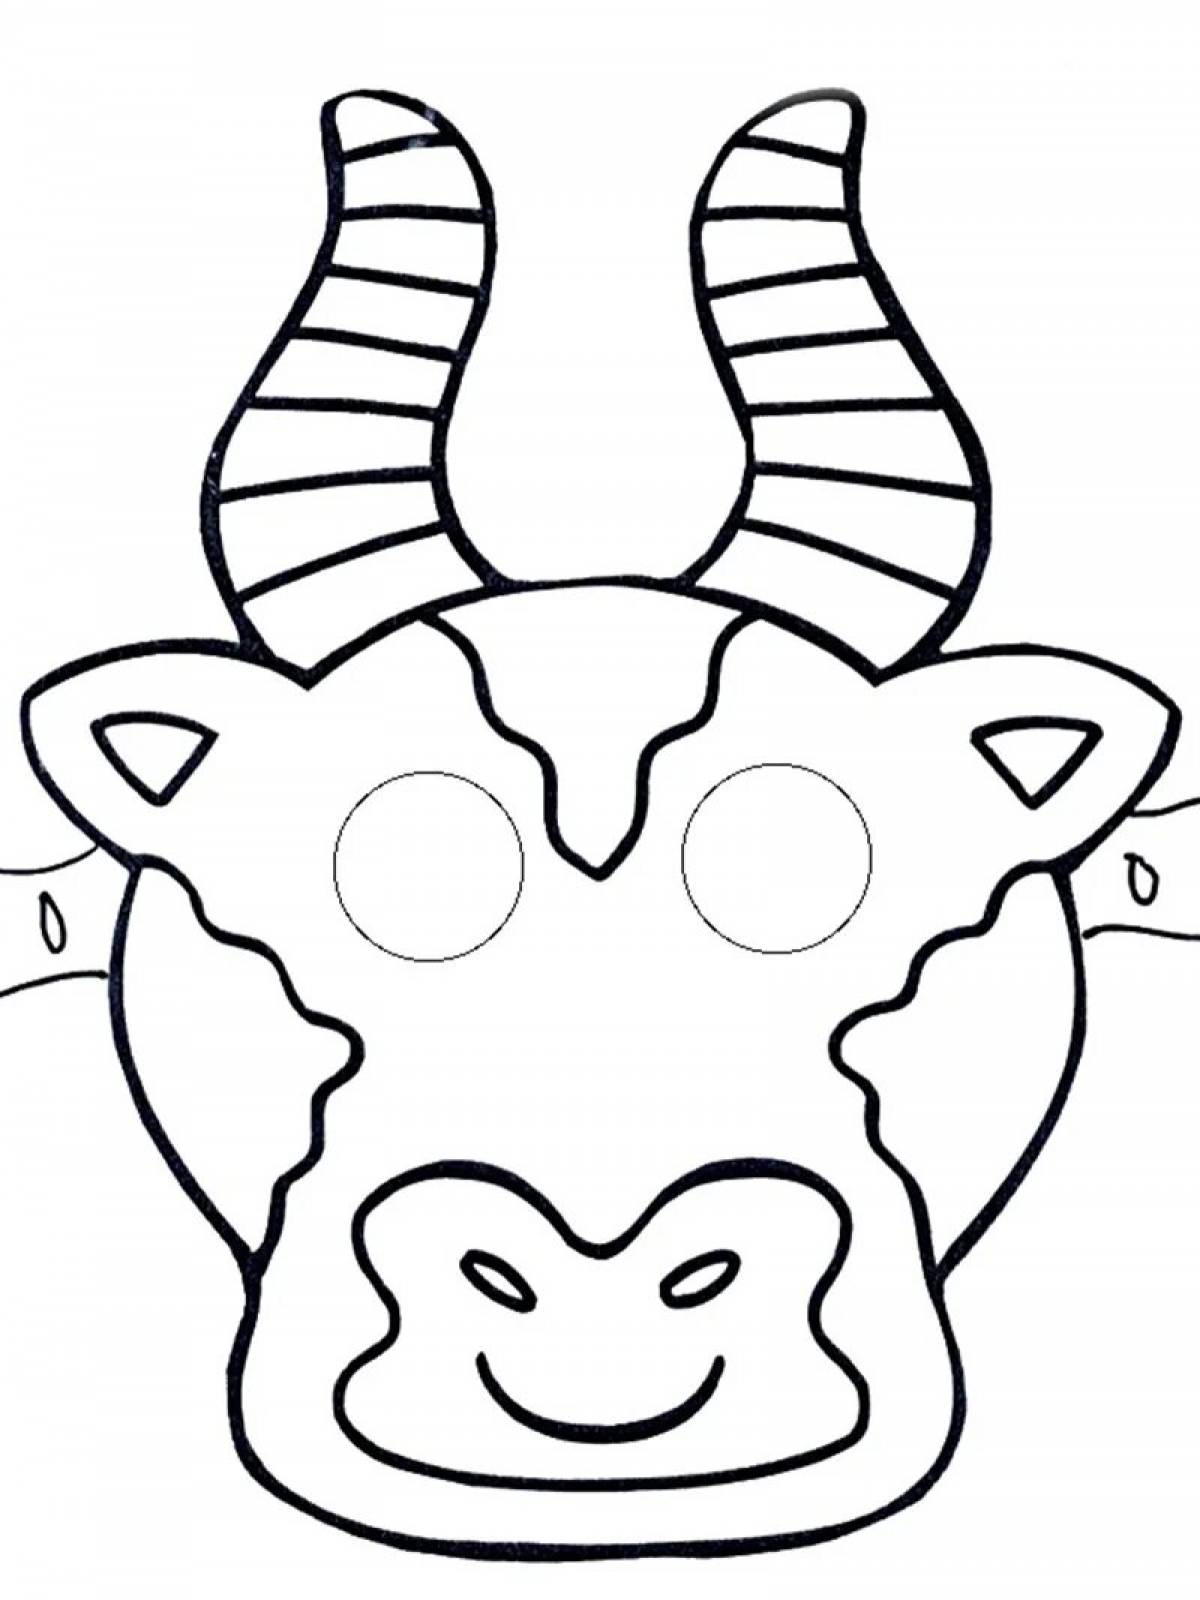 Coloring bright goat mask